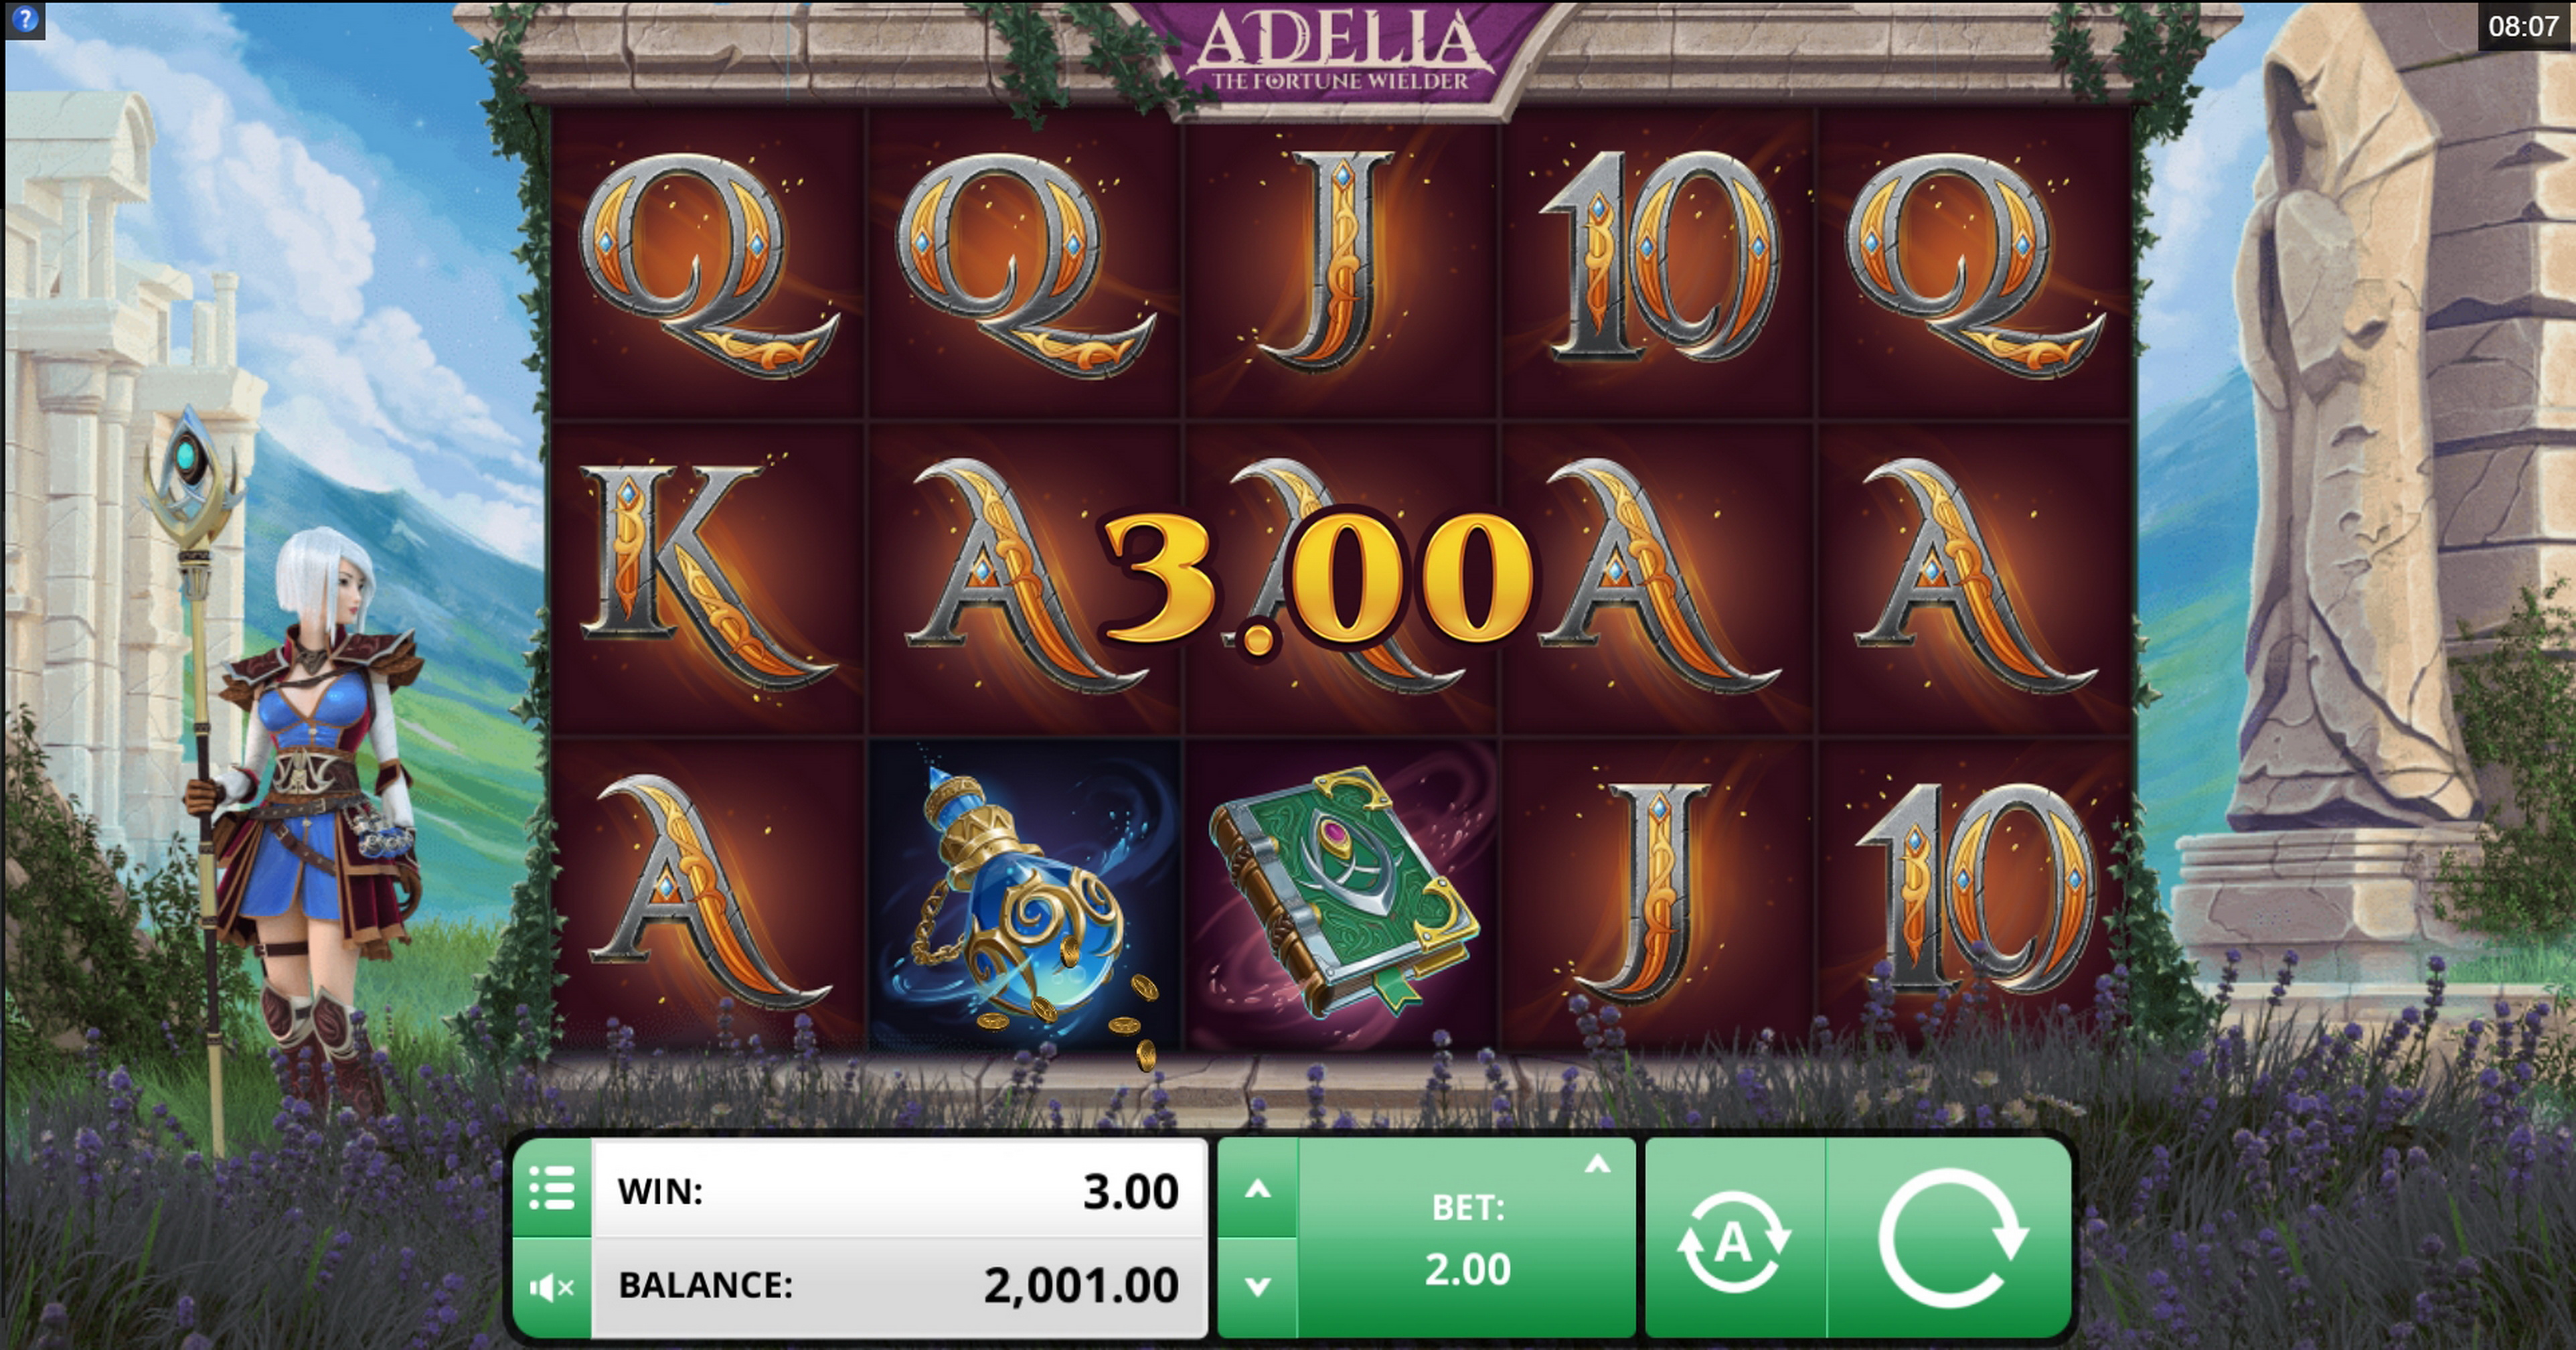 Win Money in Adelia The Fortune Wielder Free Slot Game by Foxium